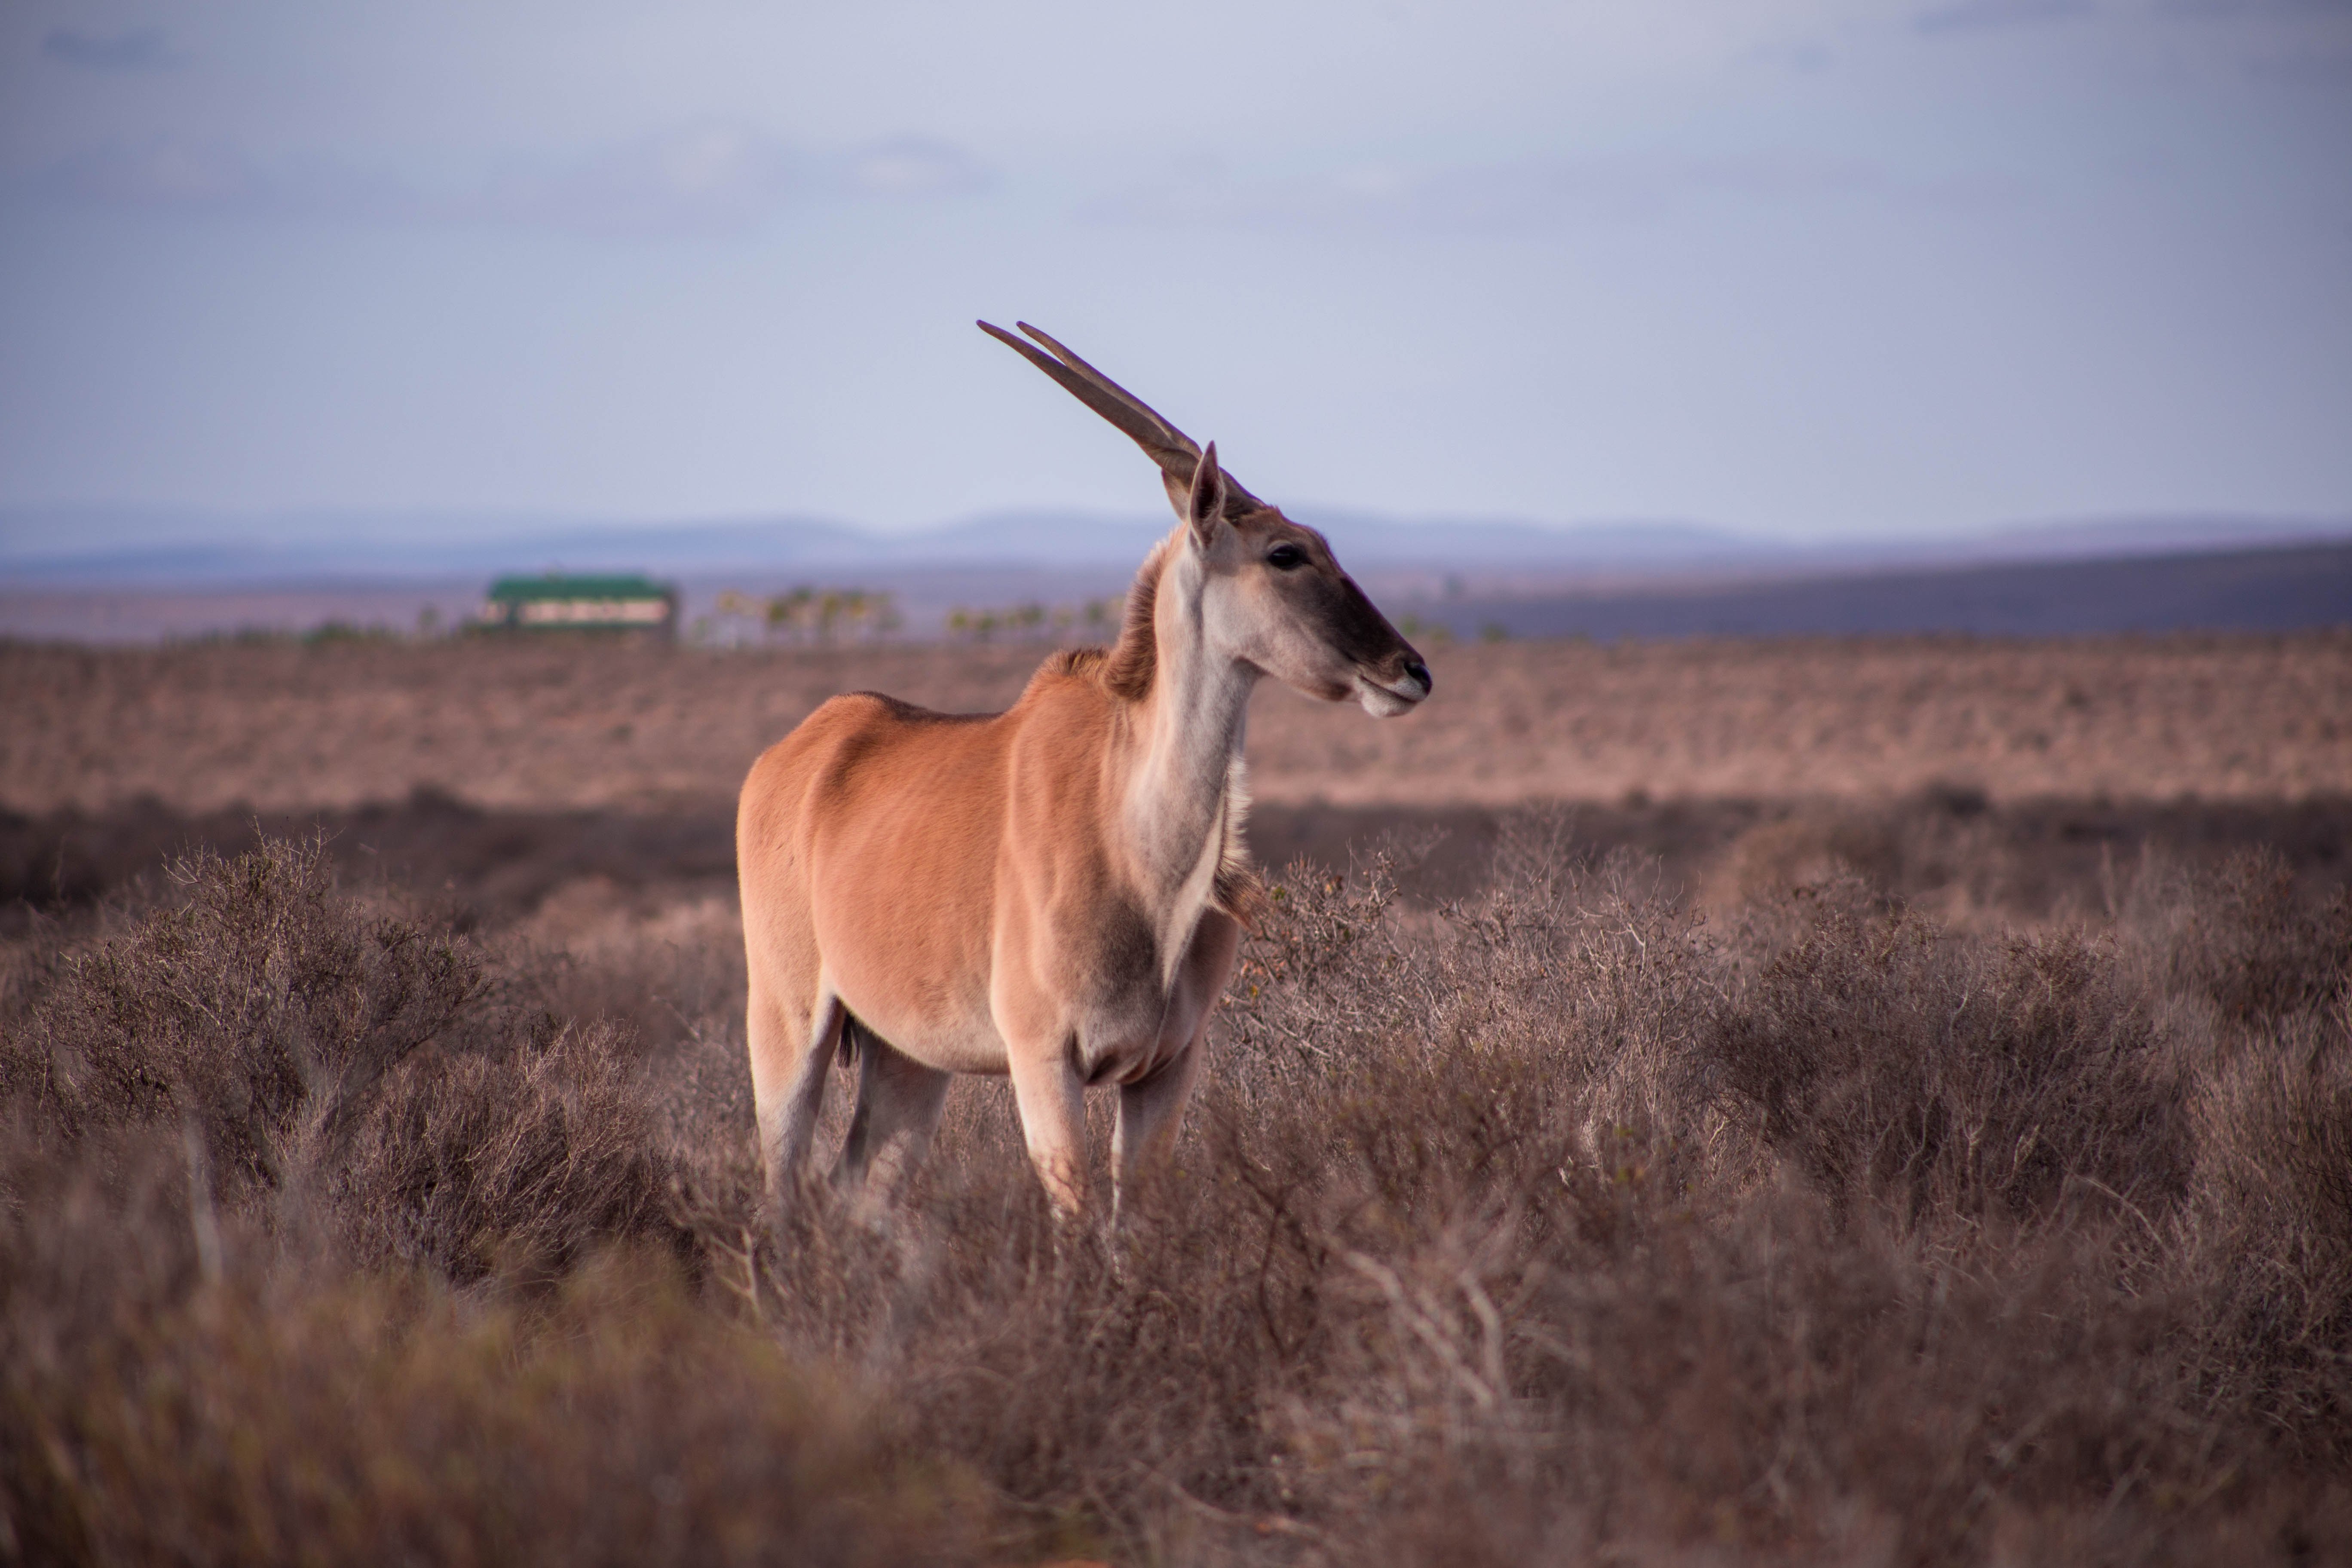 Antelope in Vredendal, South Africa photographed by Vorster van Zyl